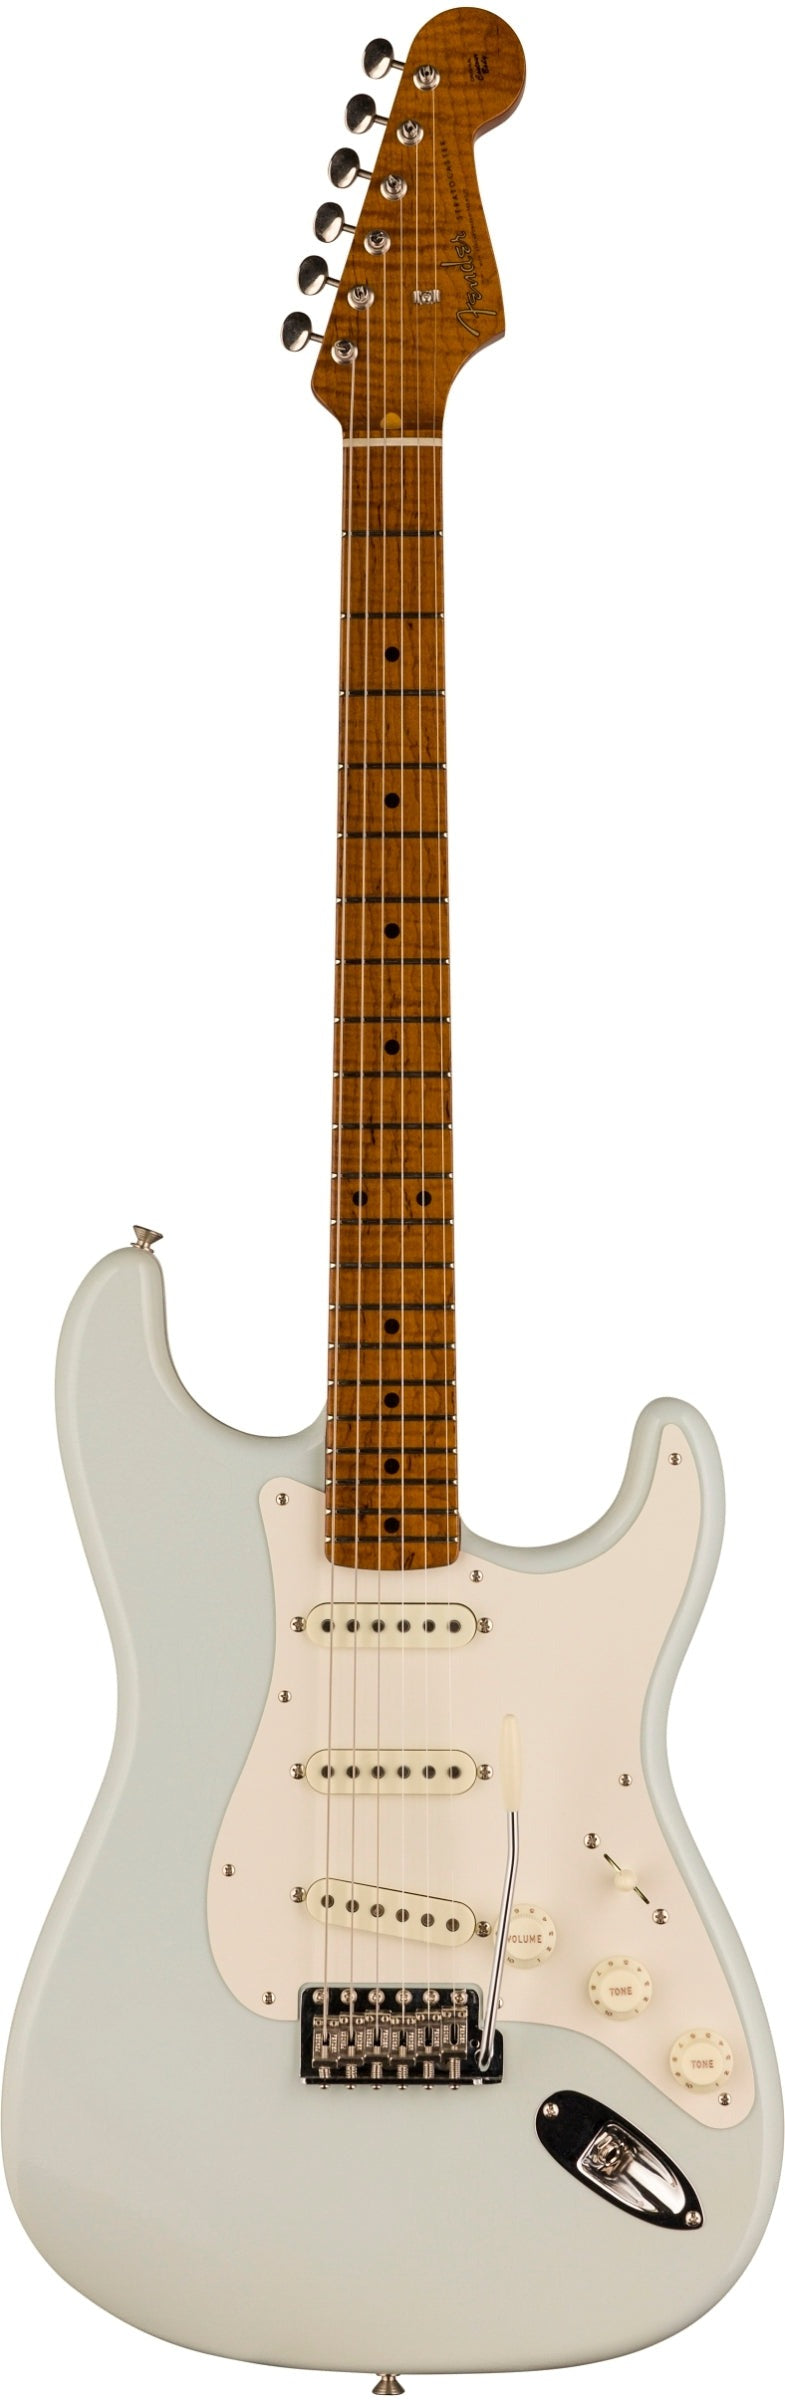 FENDER LIMITED EDITION ROASTED '50s STRAT® - DLX CLOSET CLASSIC, FADED AGED SONIC BLUE